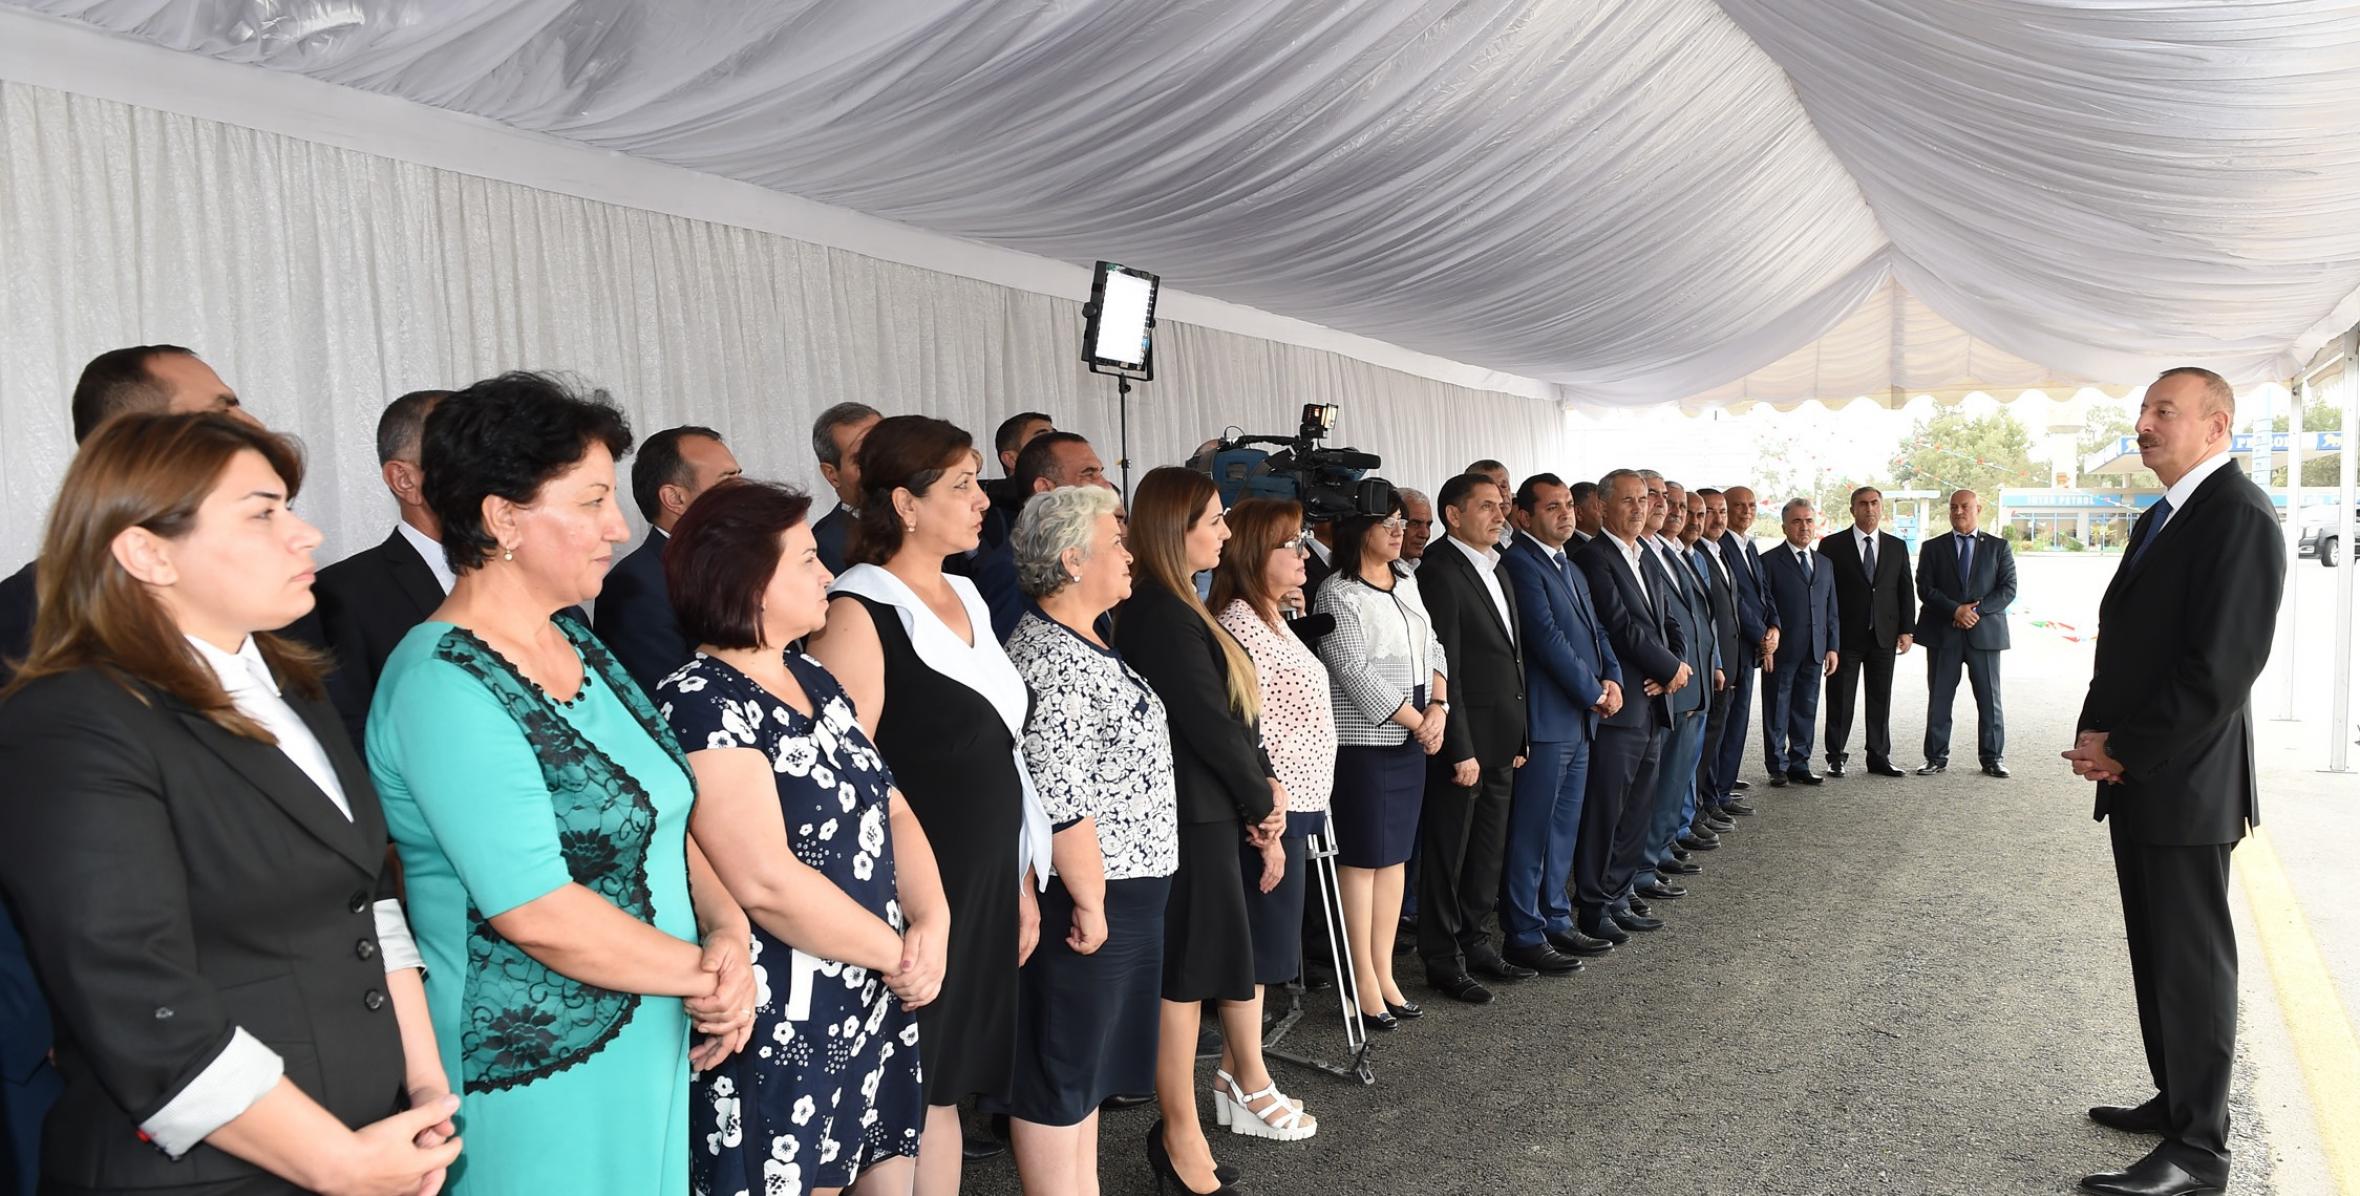 Speech by Ilham Aliyev at the meeting with representatives of the general public in Salyan